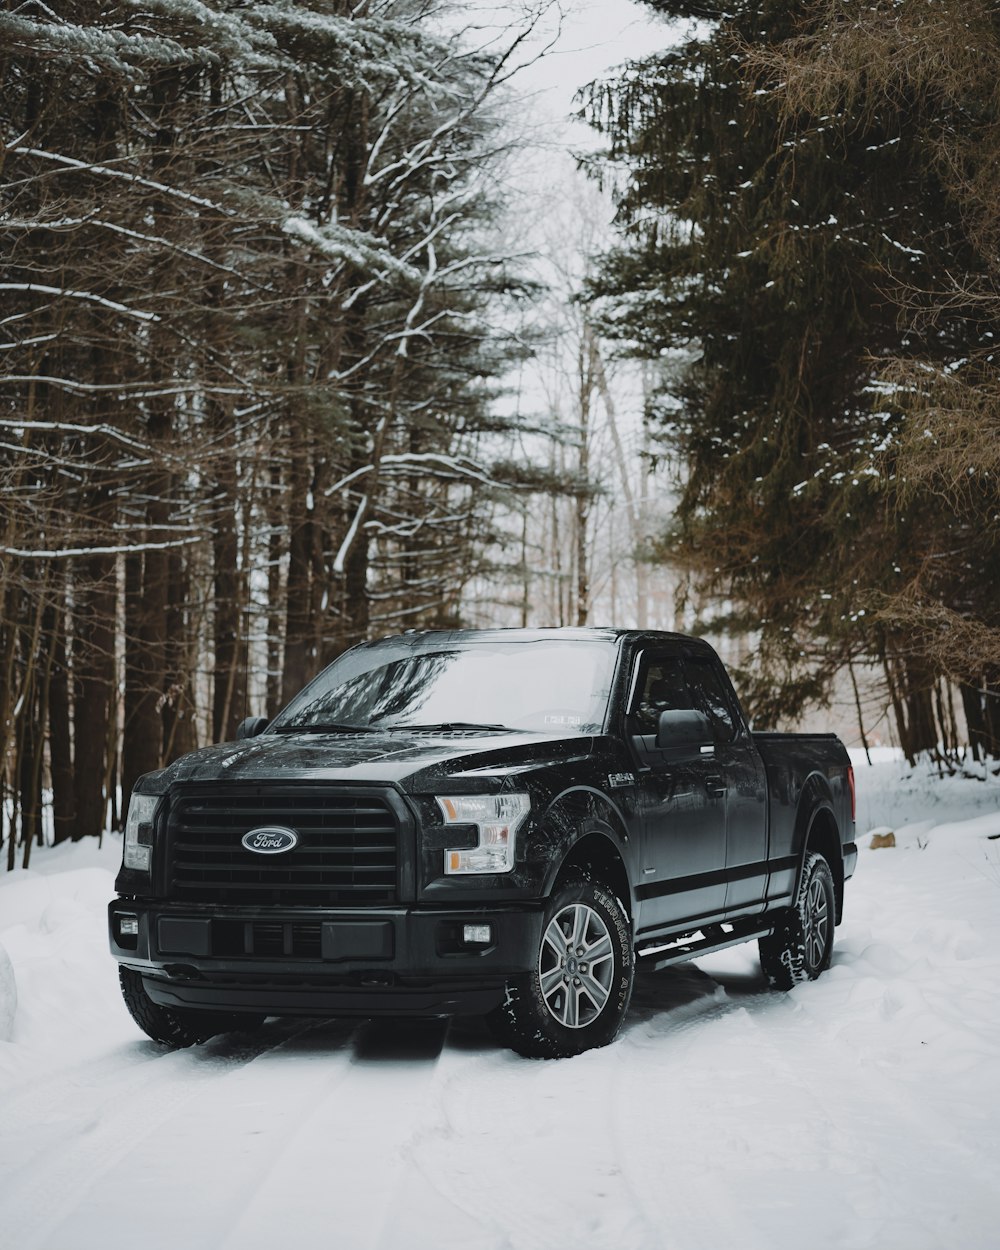 black ford f 150 on snow covered ground